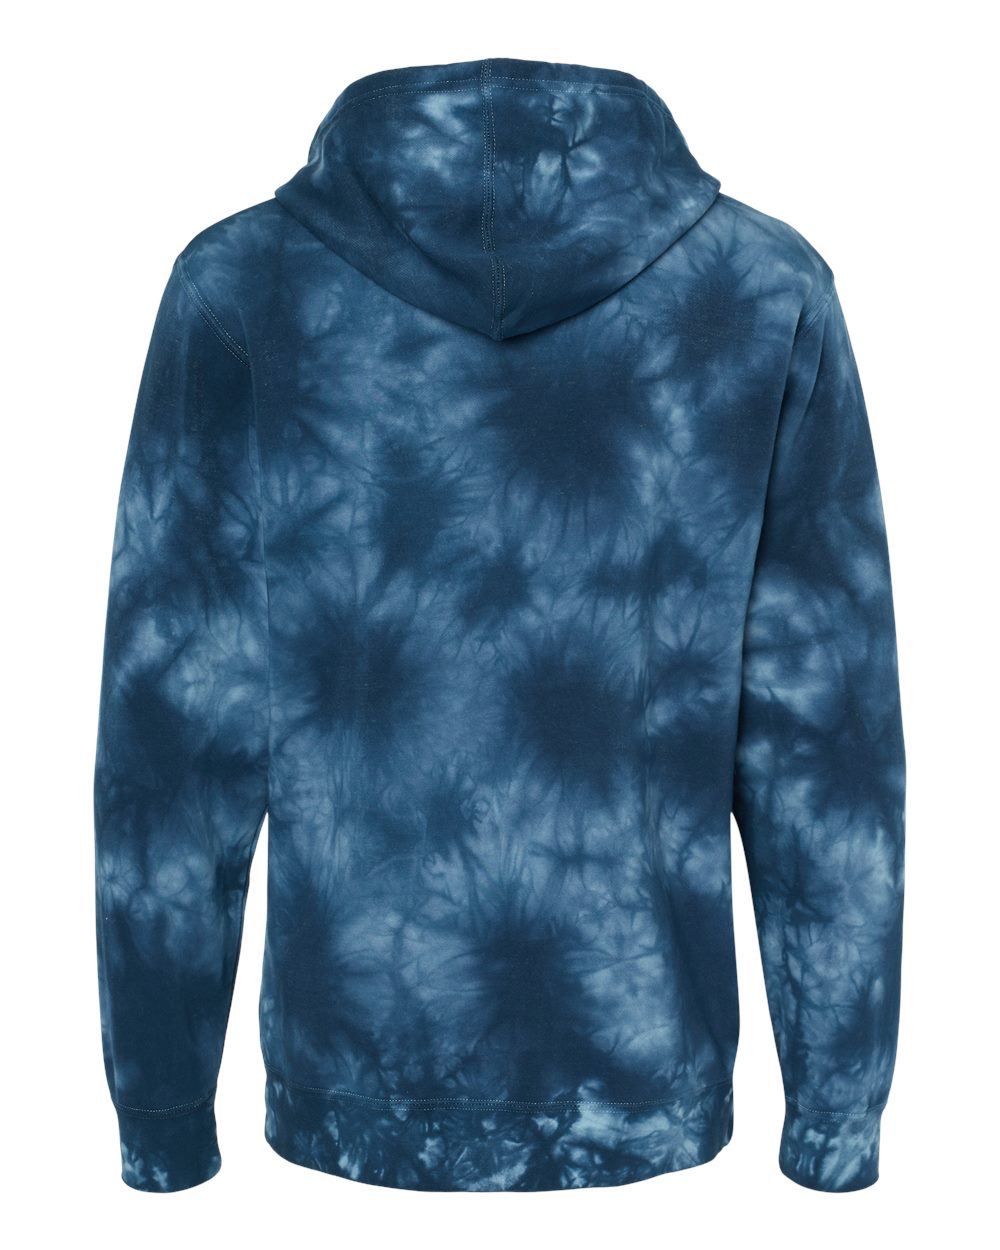 Independent Trading Co. Unisex Midweight Tie-Dyed Hooded Sweatshirt PRM4500TD #color_Tie Dye Navy